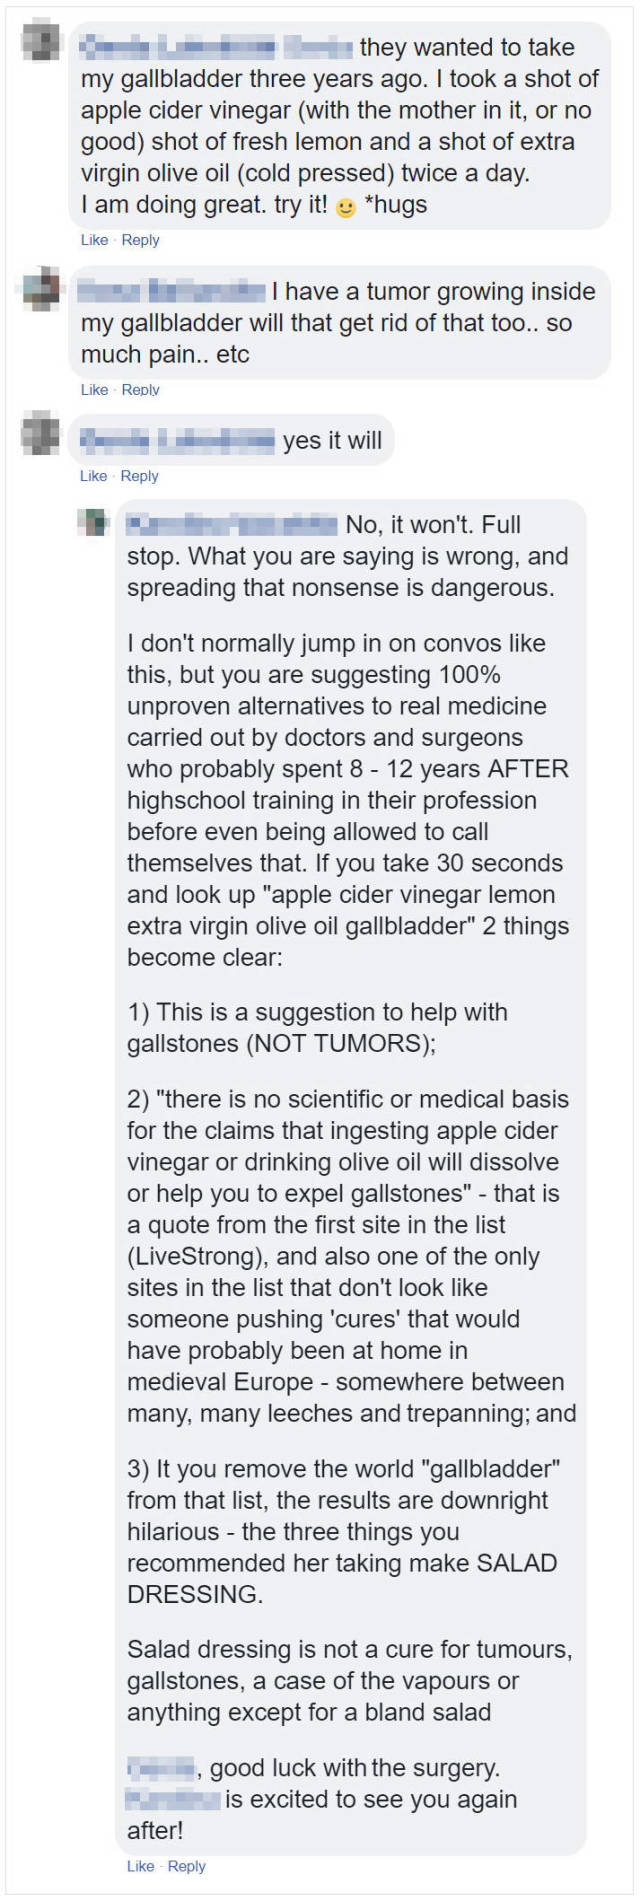 Internet Is A Bad Place To Look For Medical Advice